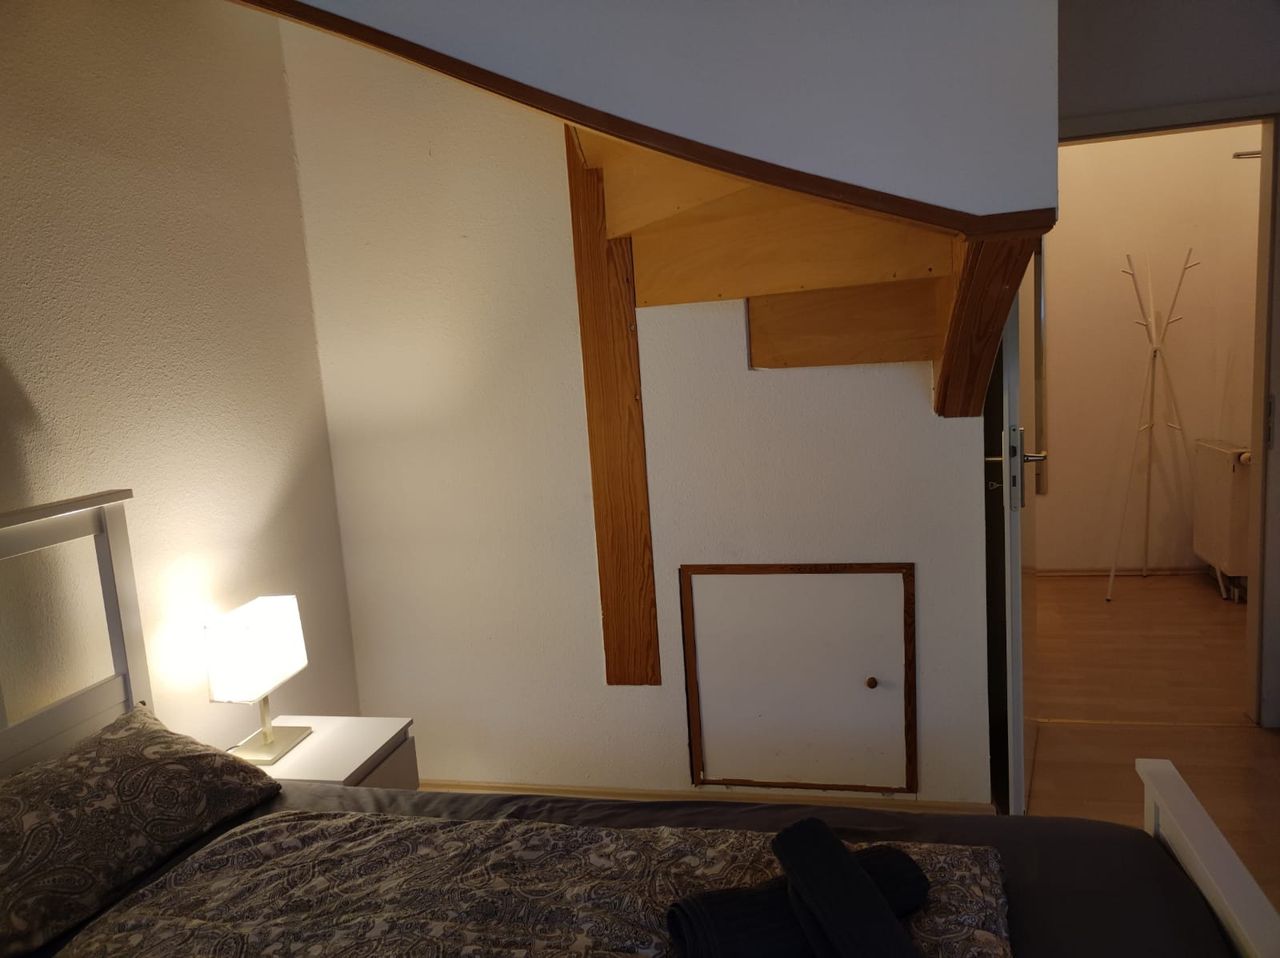 Beautiful maisonette flat with roof terrace and parking space in Braunschweig